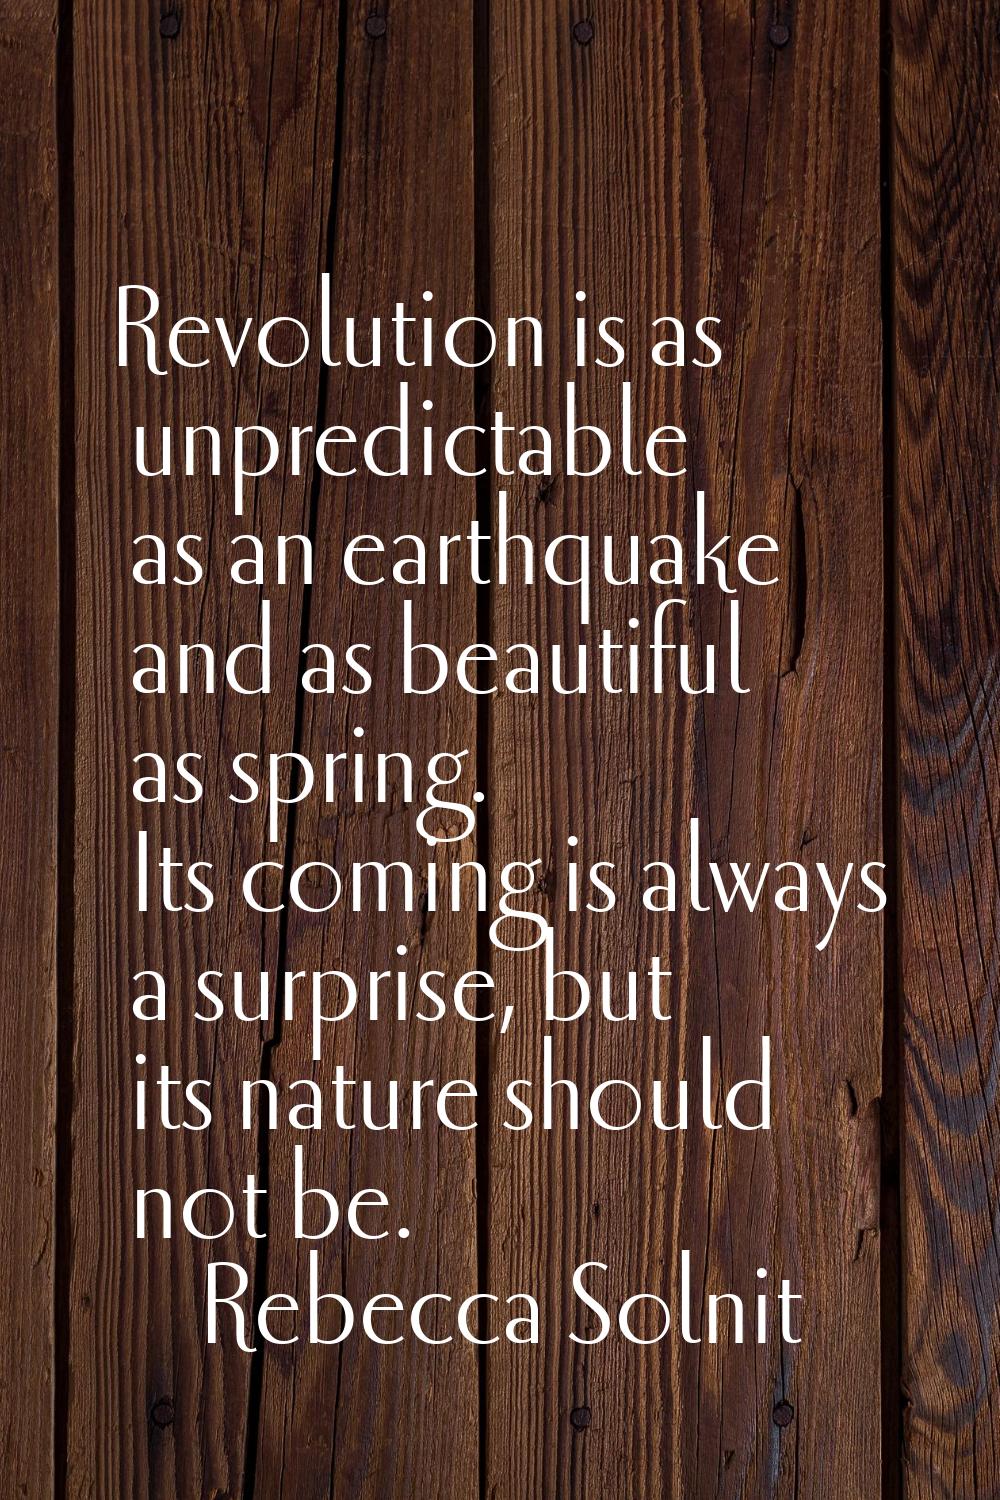 Revolution is as unpredictable as an earthquake and as beautiful as spring. Its coming is always a 